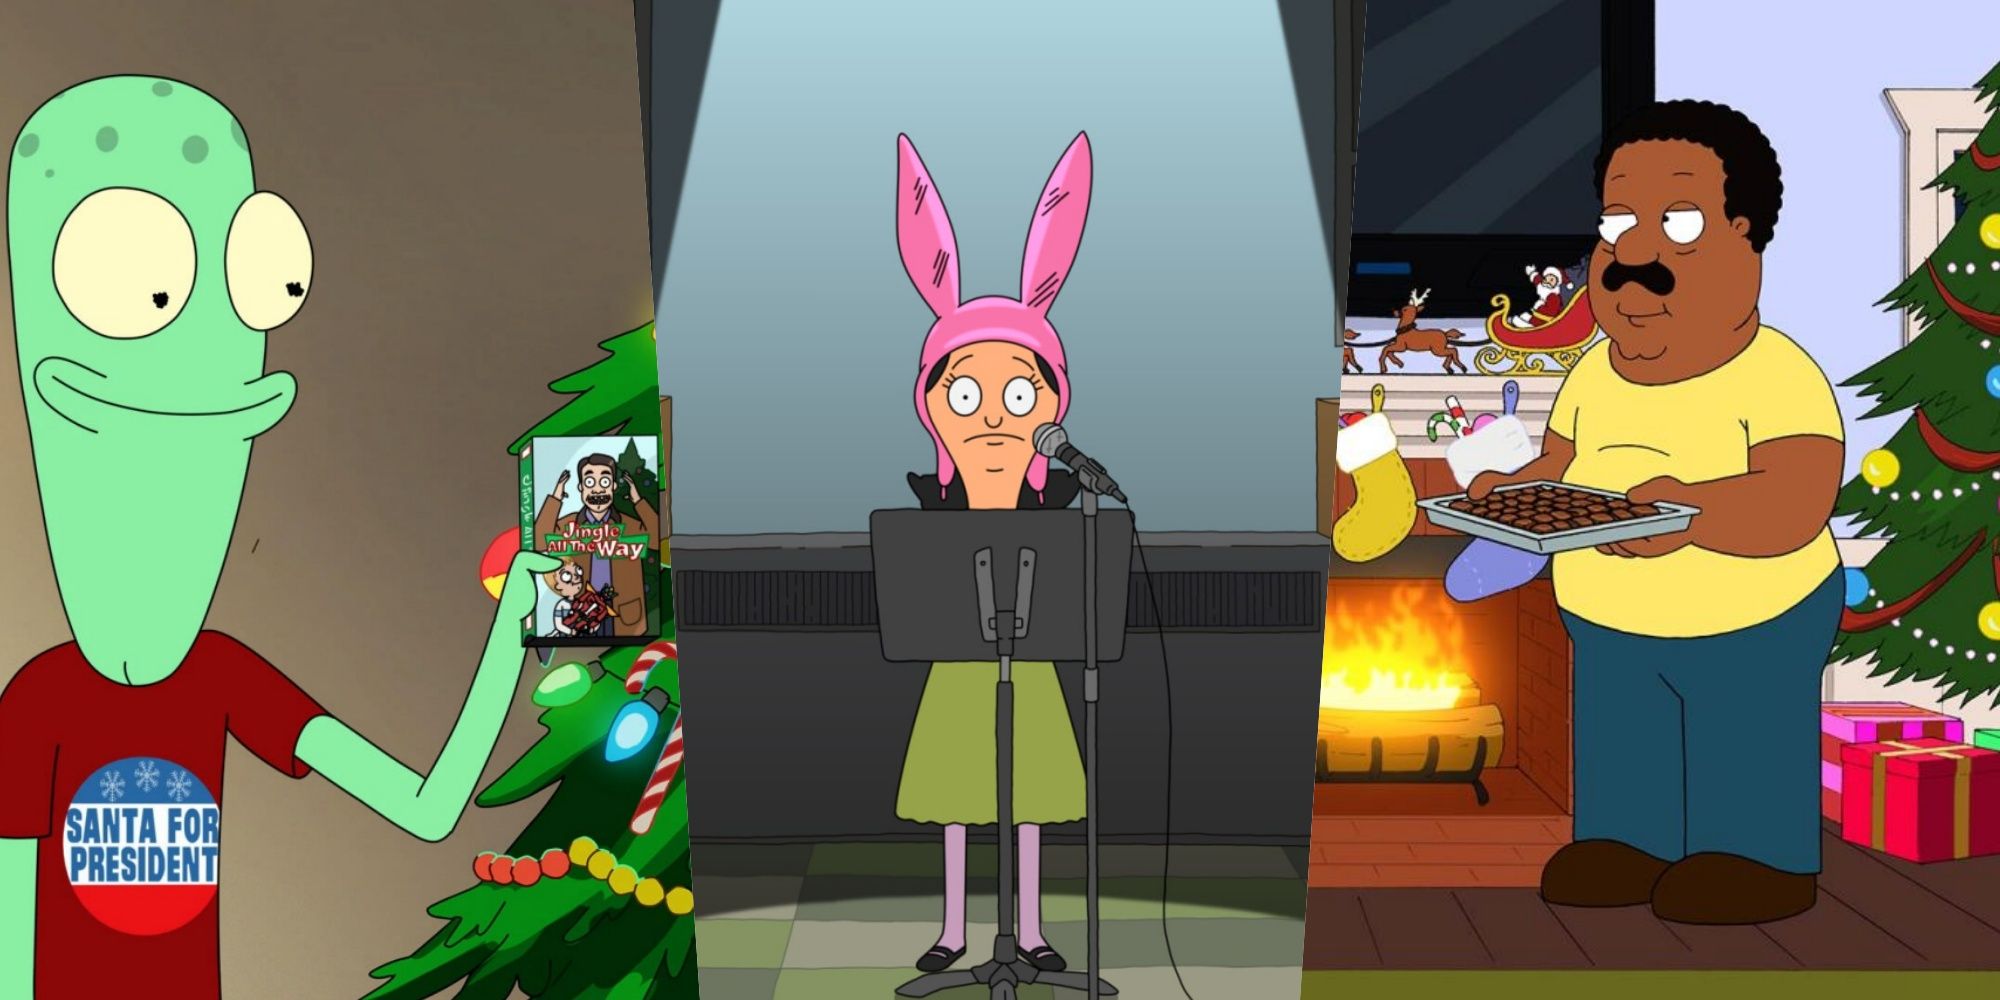 10 Best Adult Animation Holiday Episodes and Specials, According to IMDb